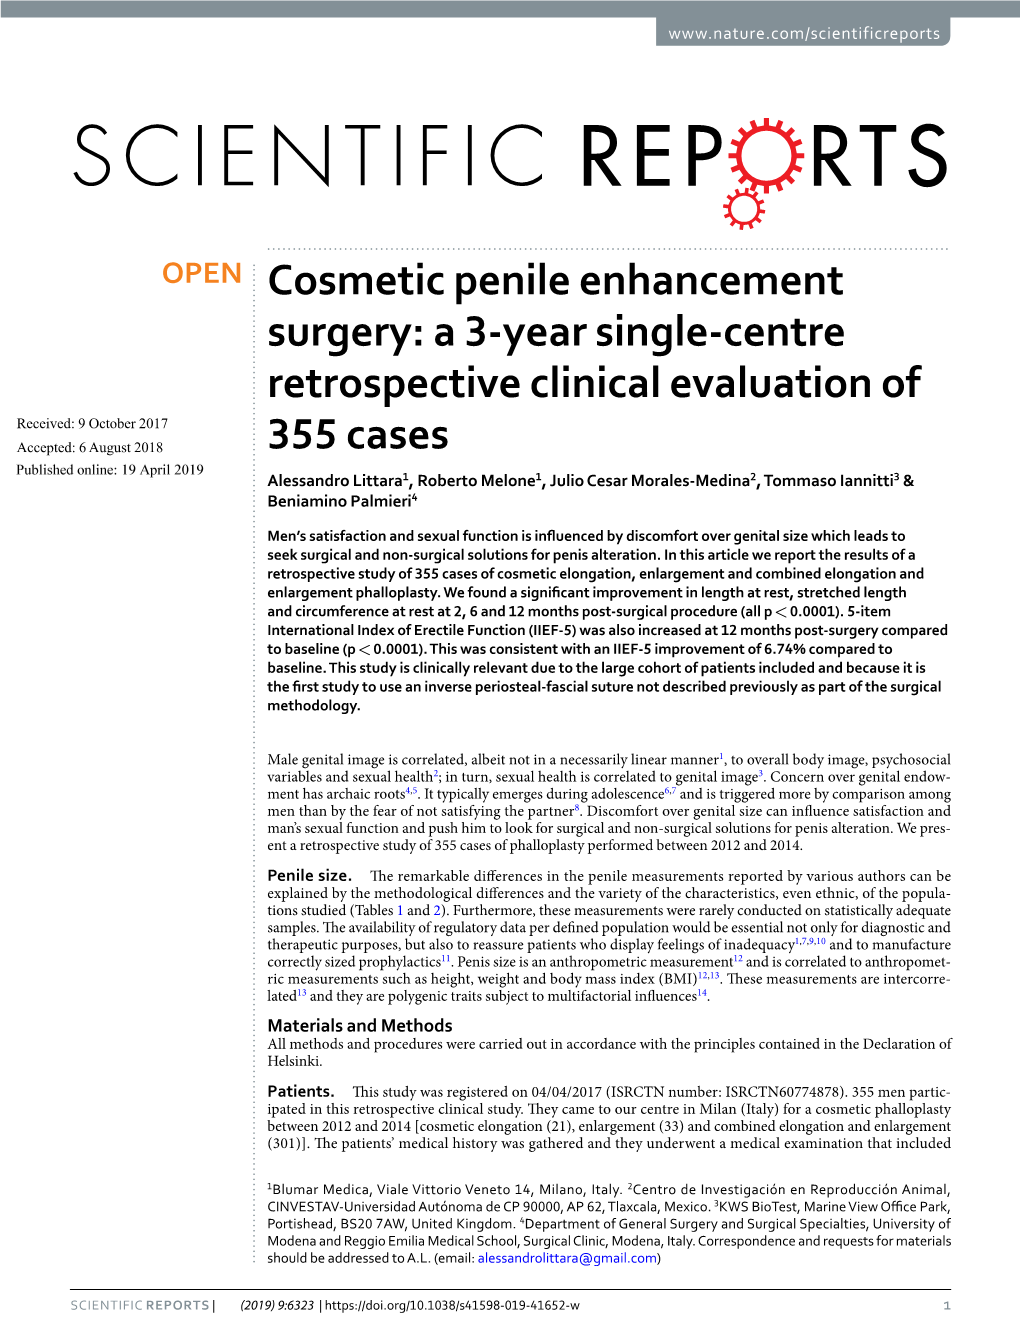 Cosmetic Penile Enhancement Surgery: a 3-Year Single-Centre